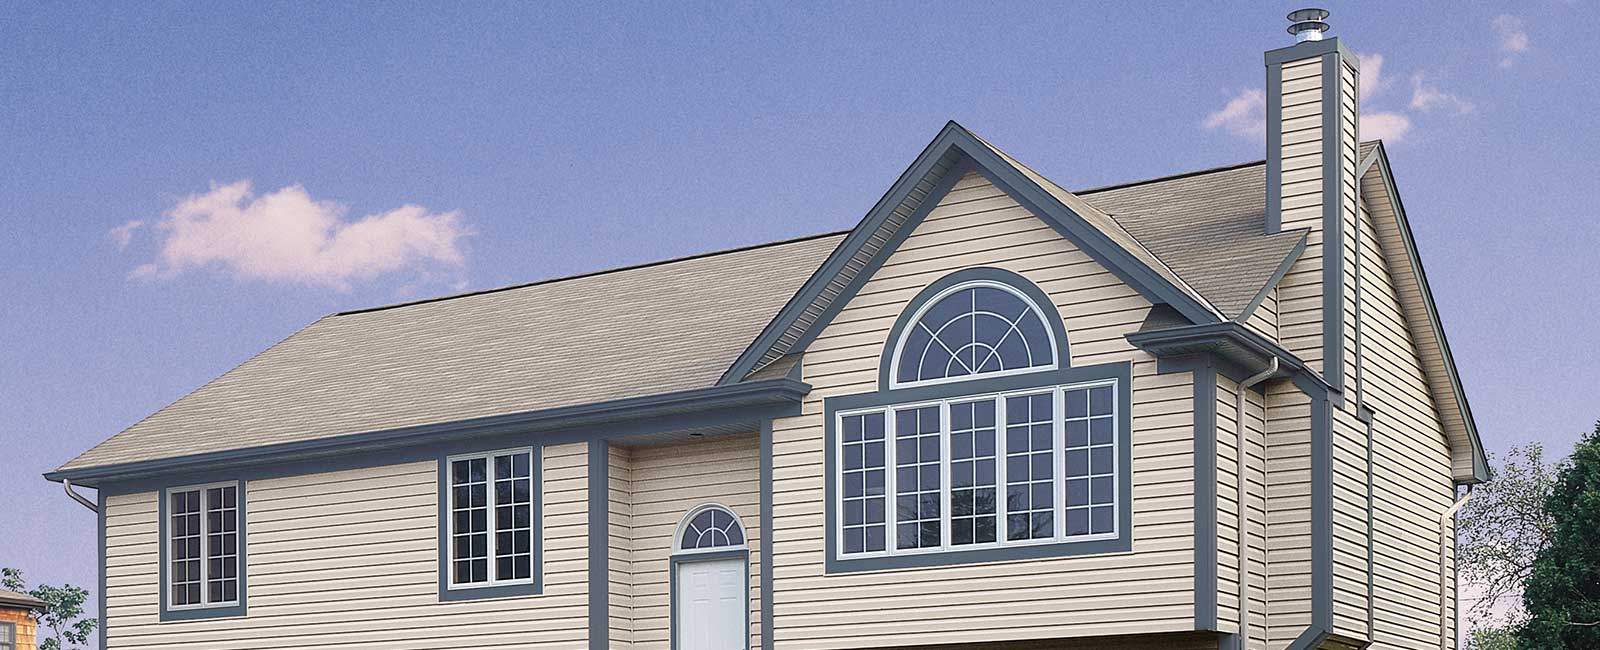 Siding Options and Materials